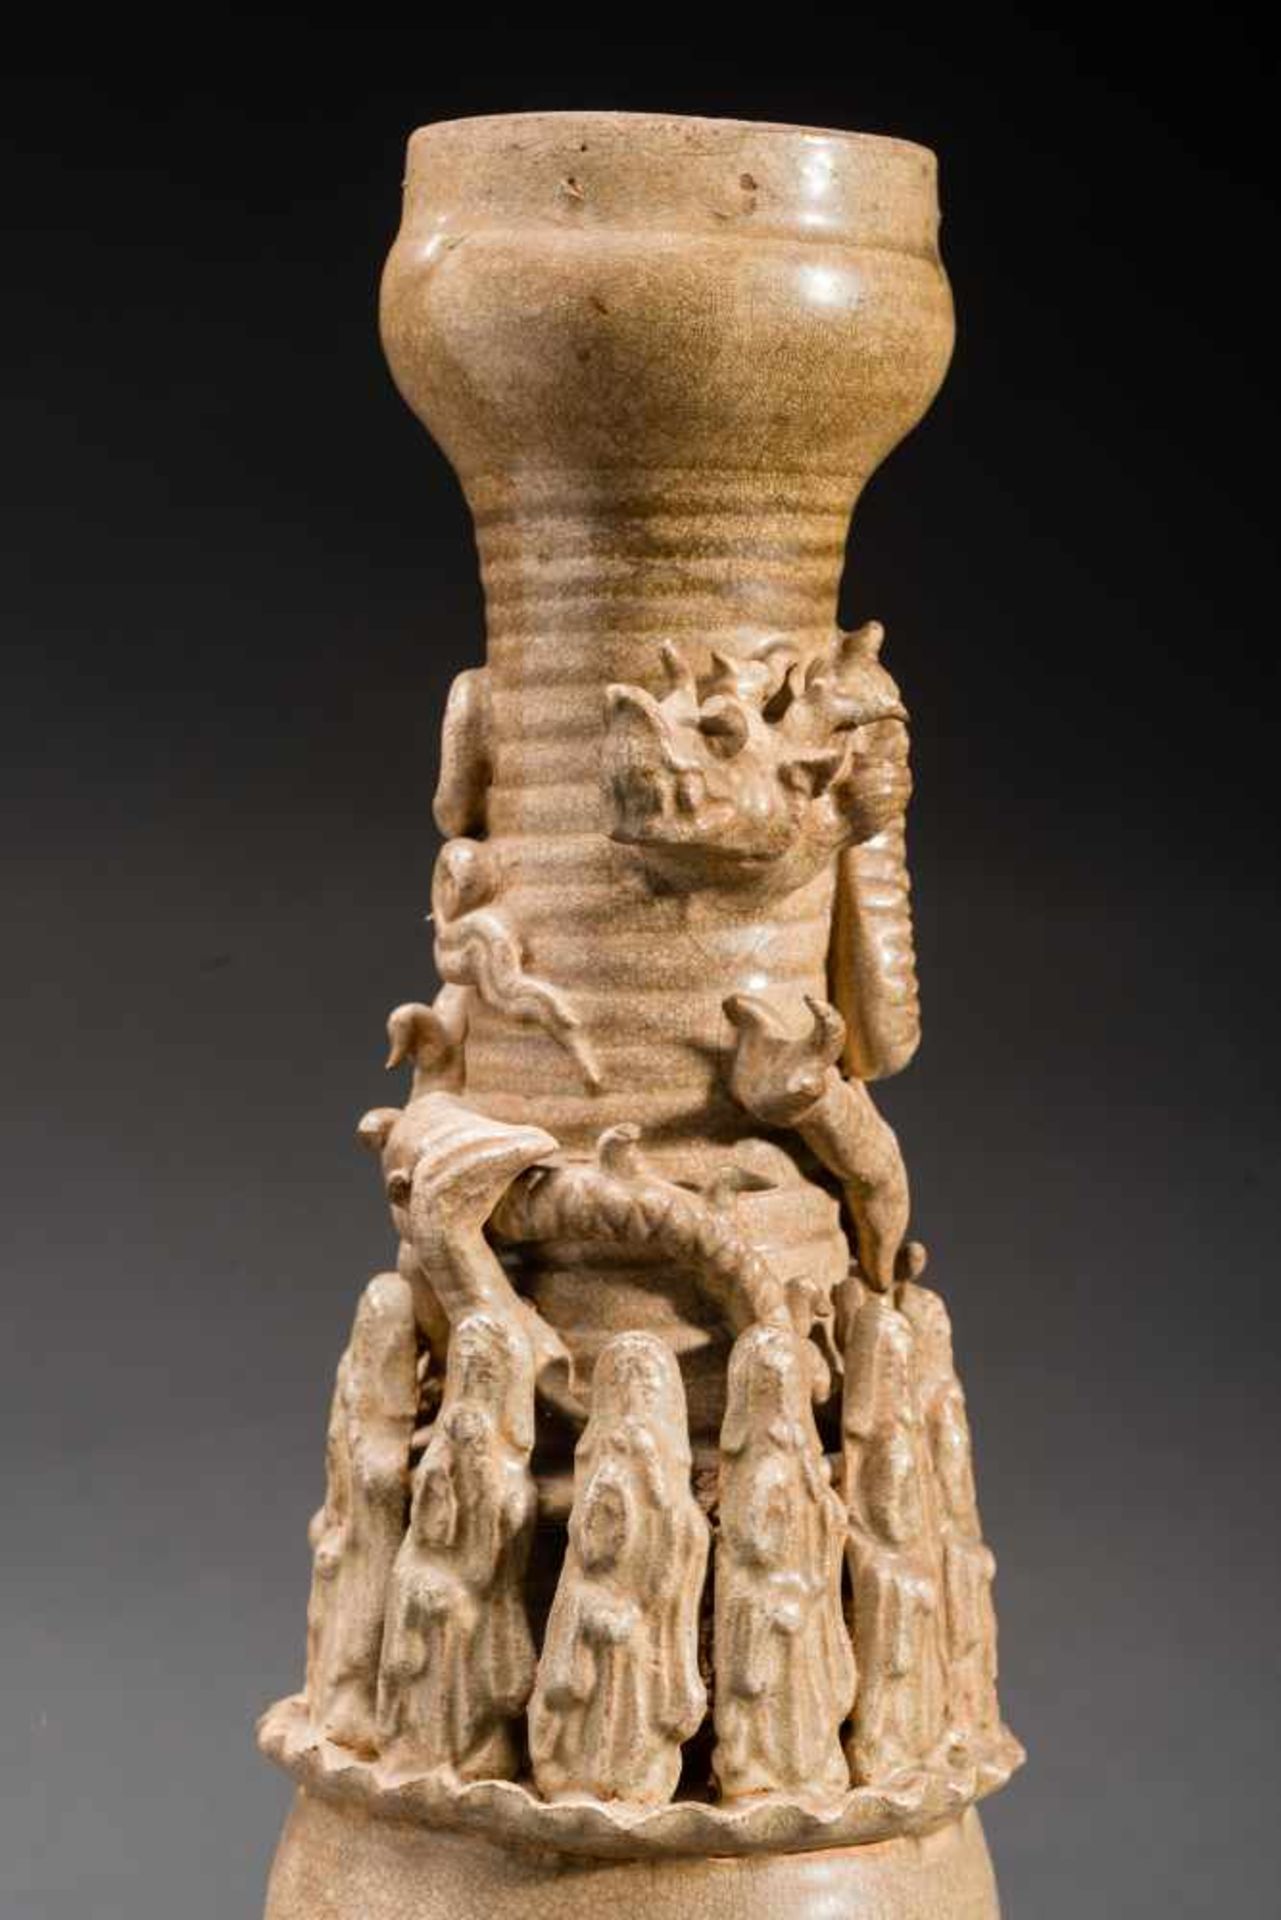 A TALL BURIAL VASEGlazed ceramicChina, Song dynasty (960-1279), 12th-13th centuryThe foot is - Image 4 of 5